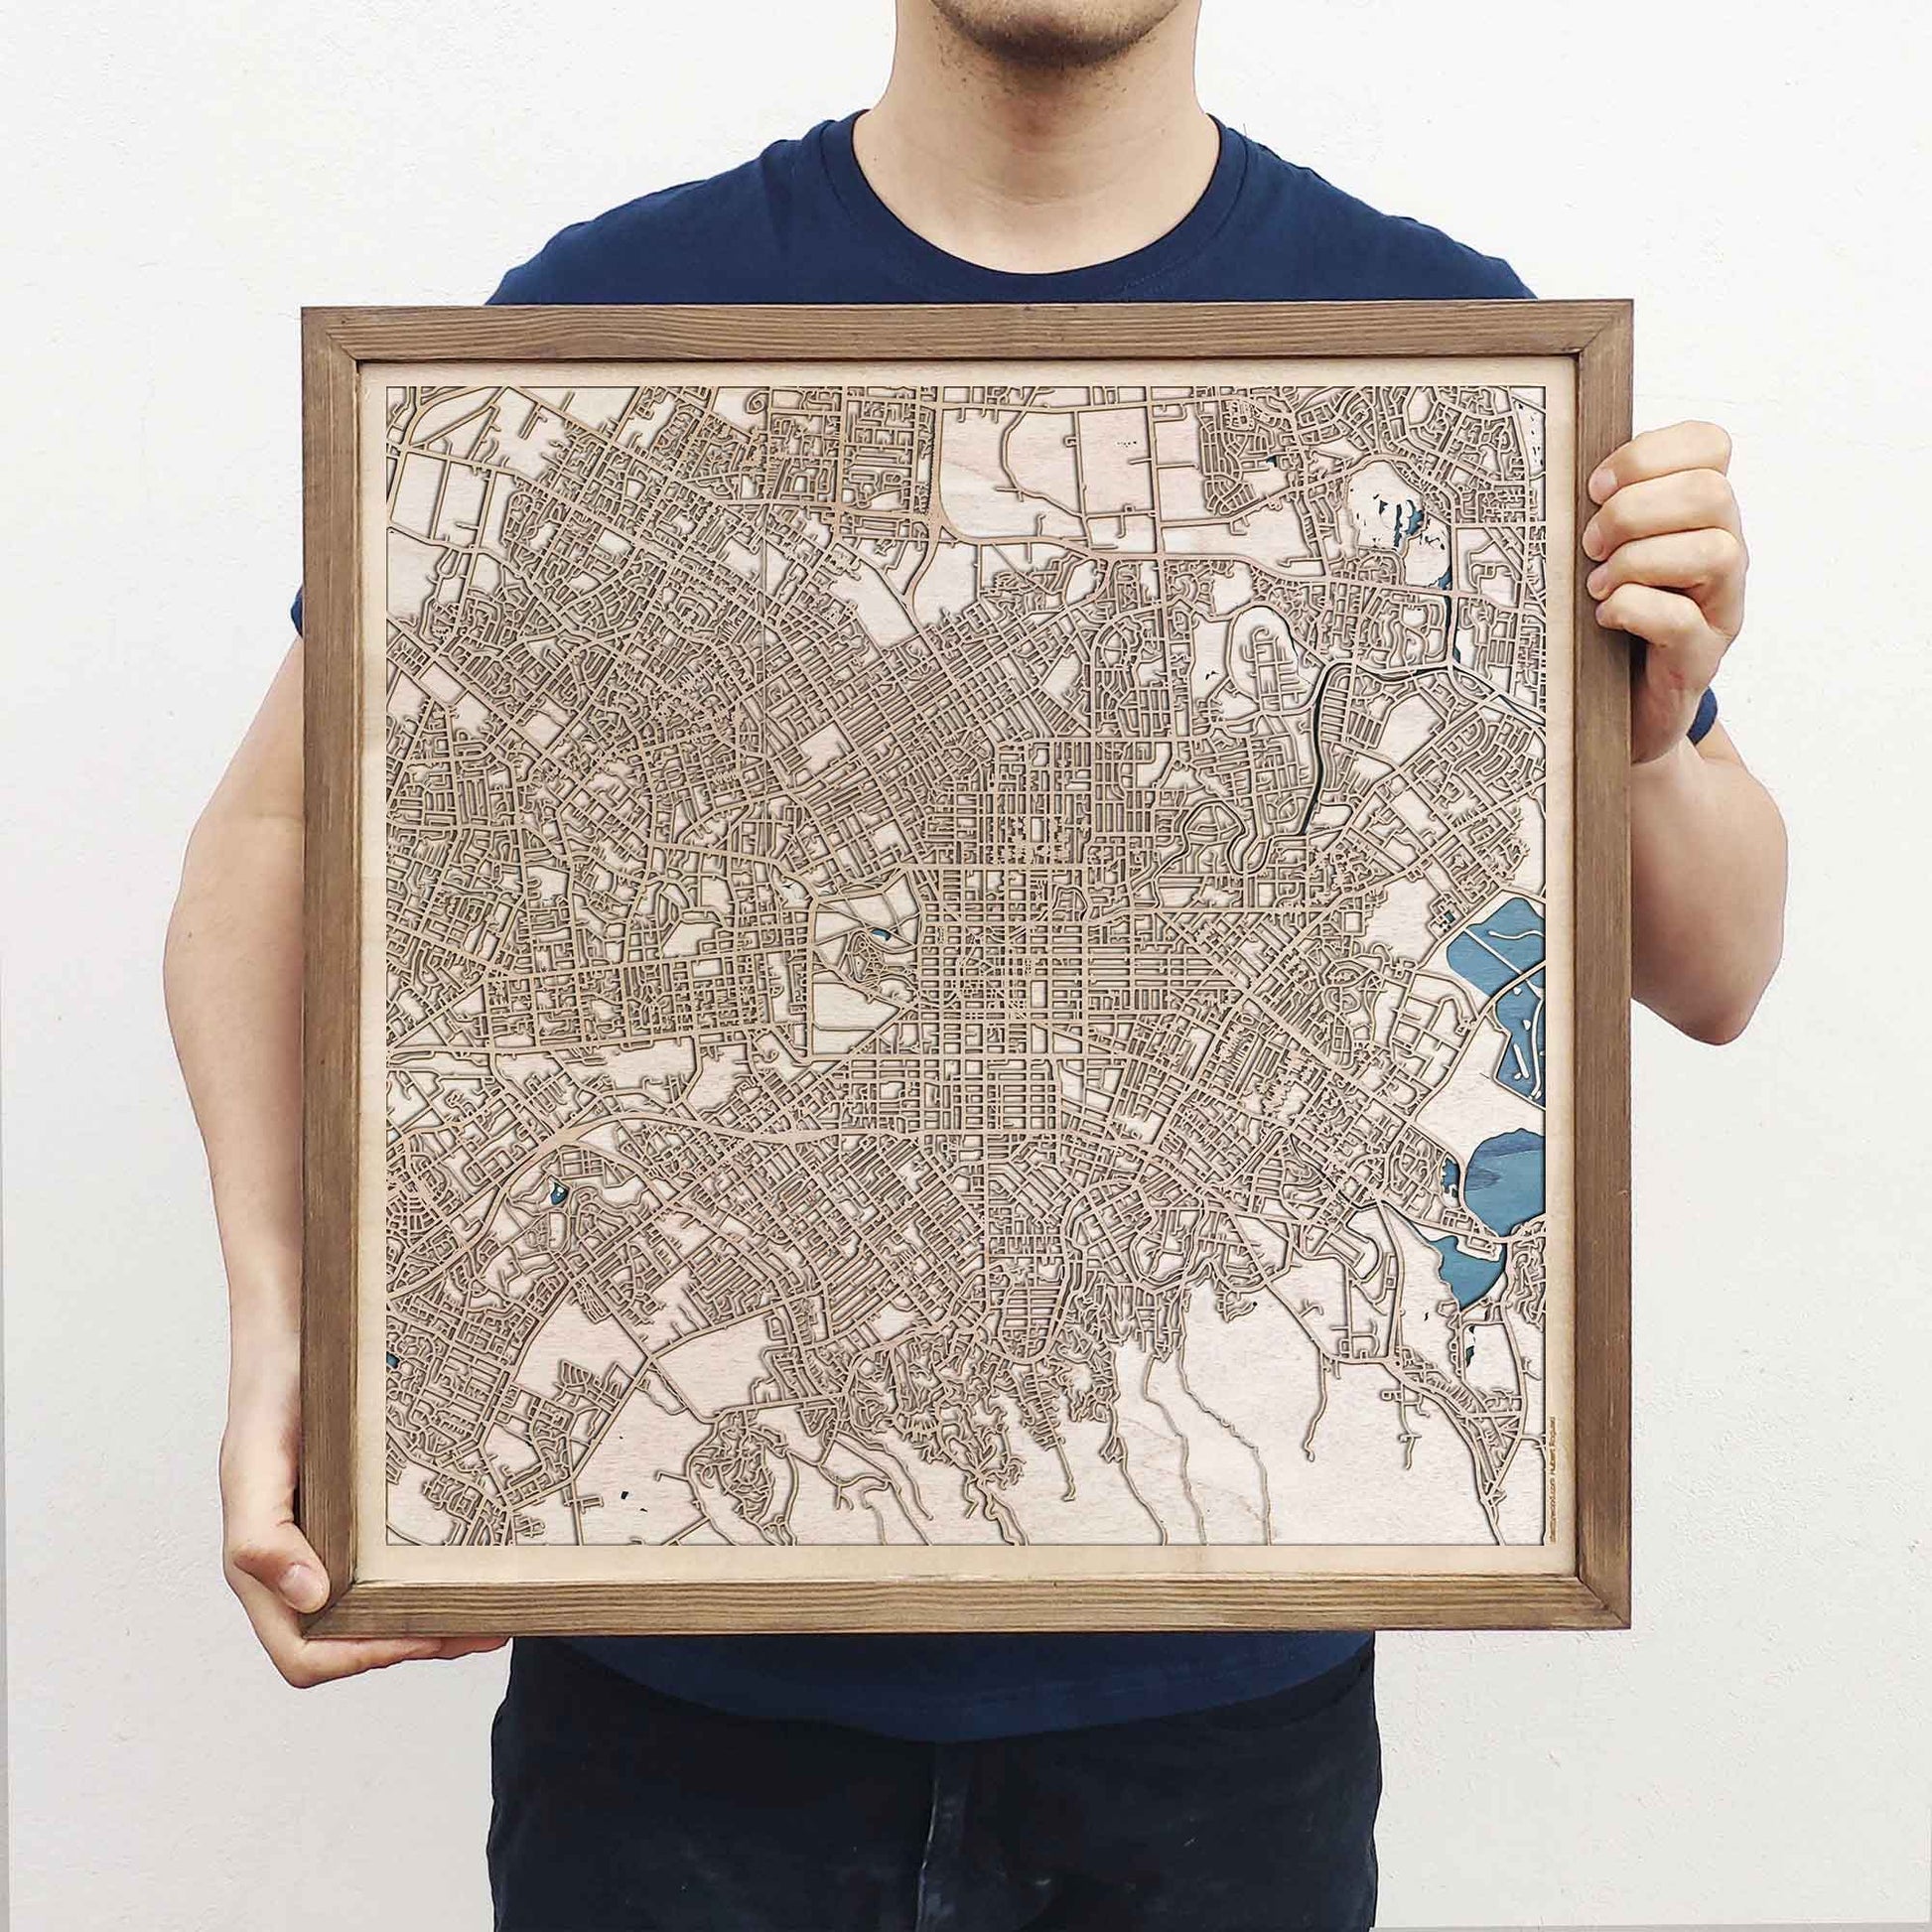 Christchurch Wooden Map by CityWood - Custom Wood Map Art - Unique Laser Cut Engraved - Anniversary Gift